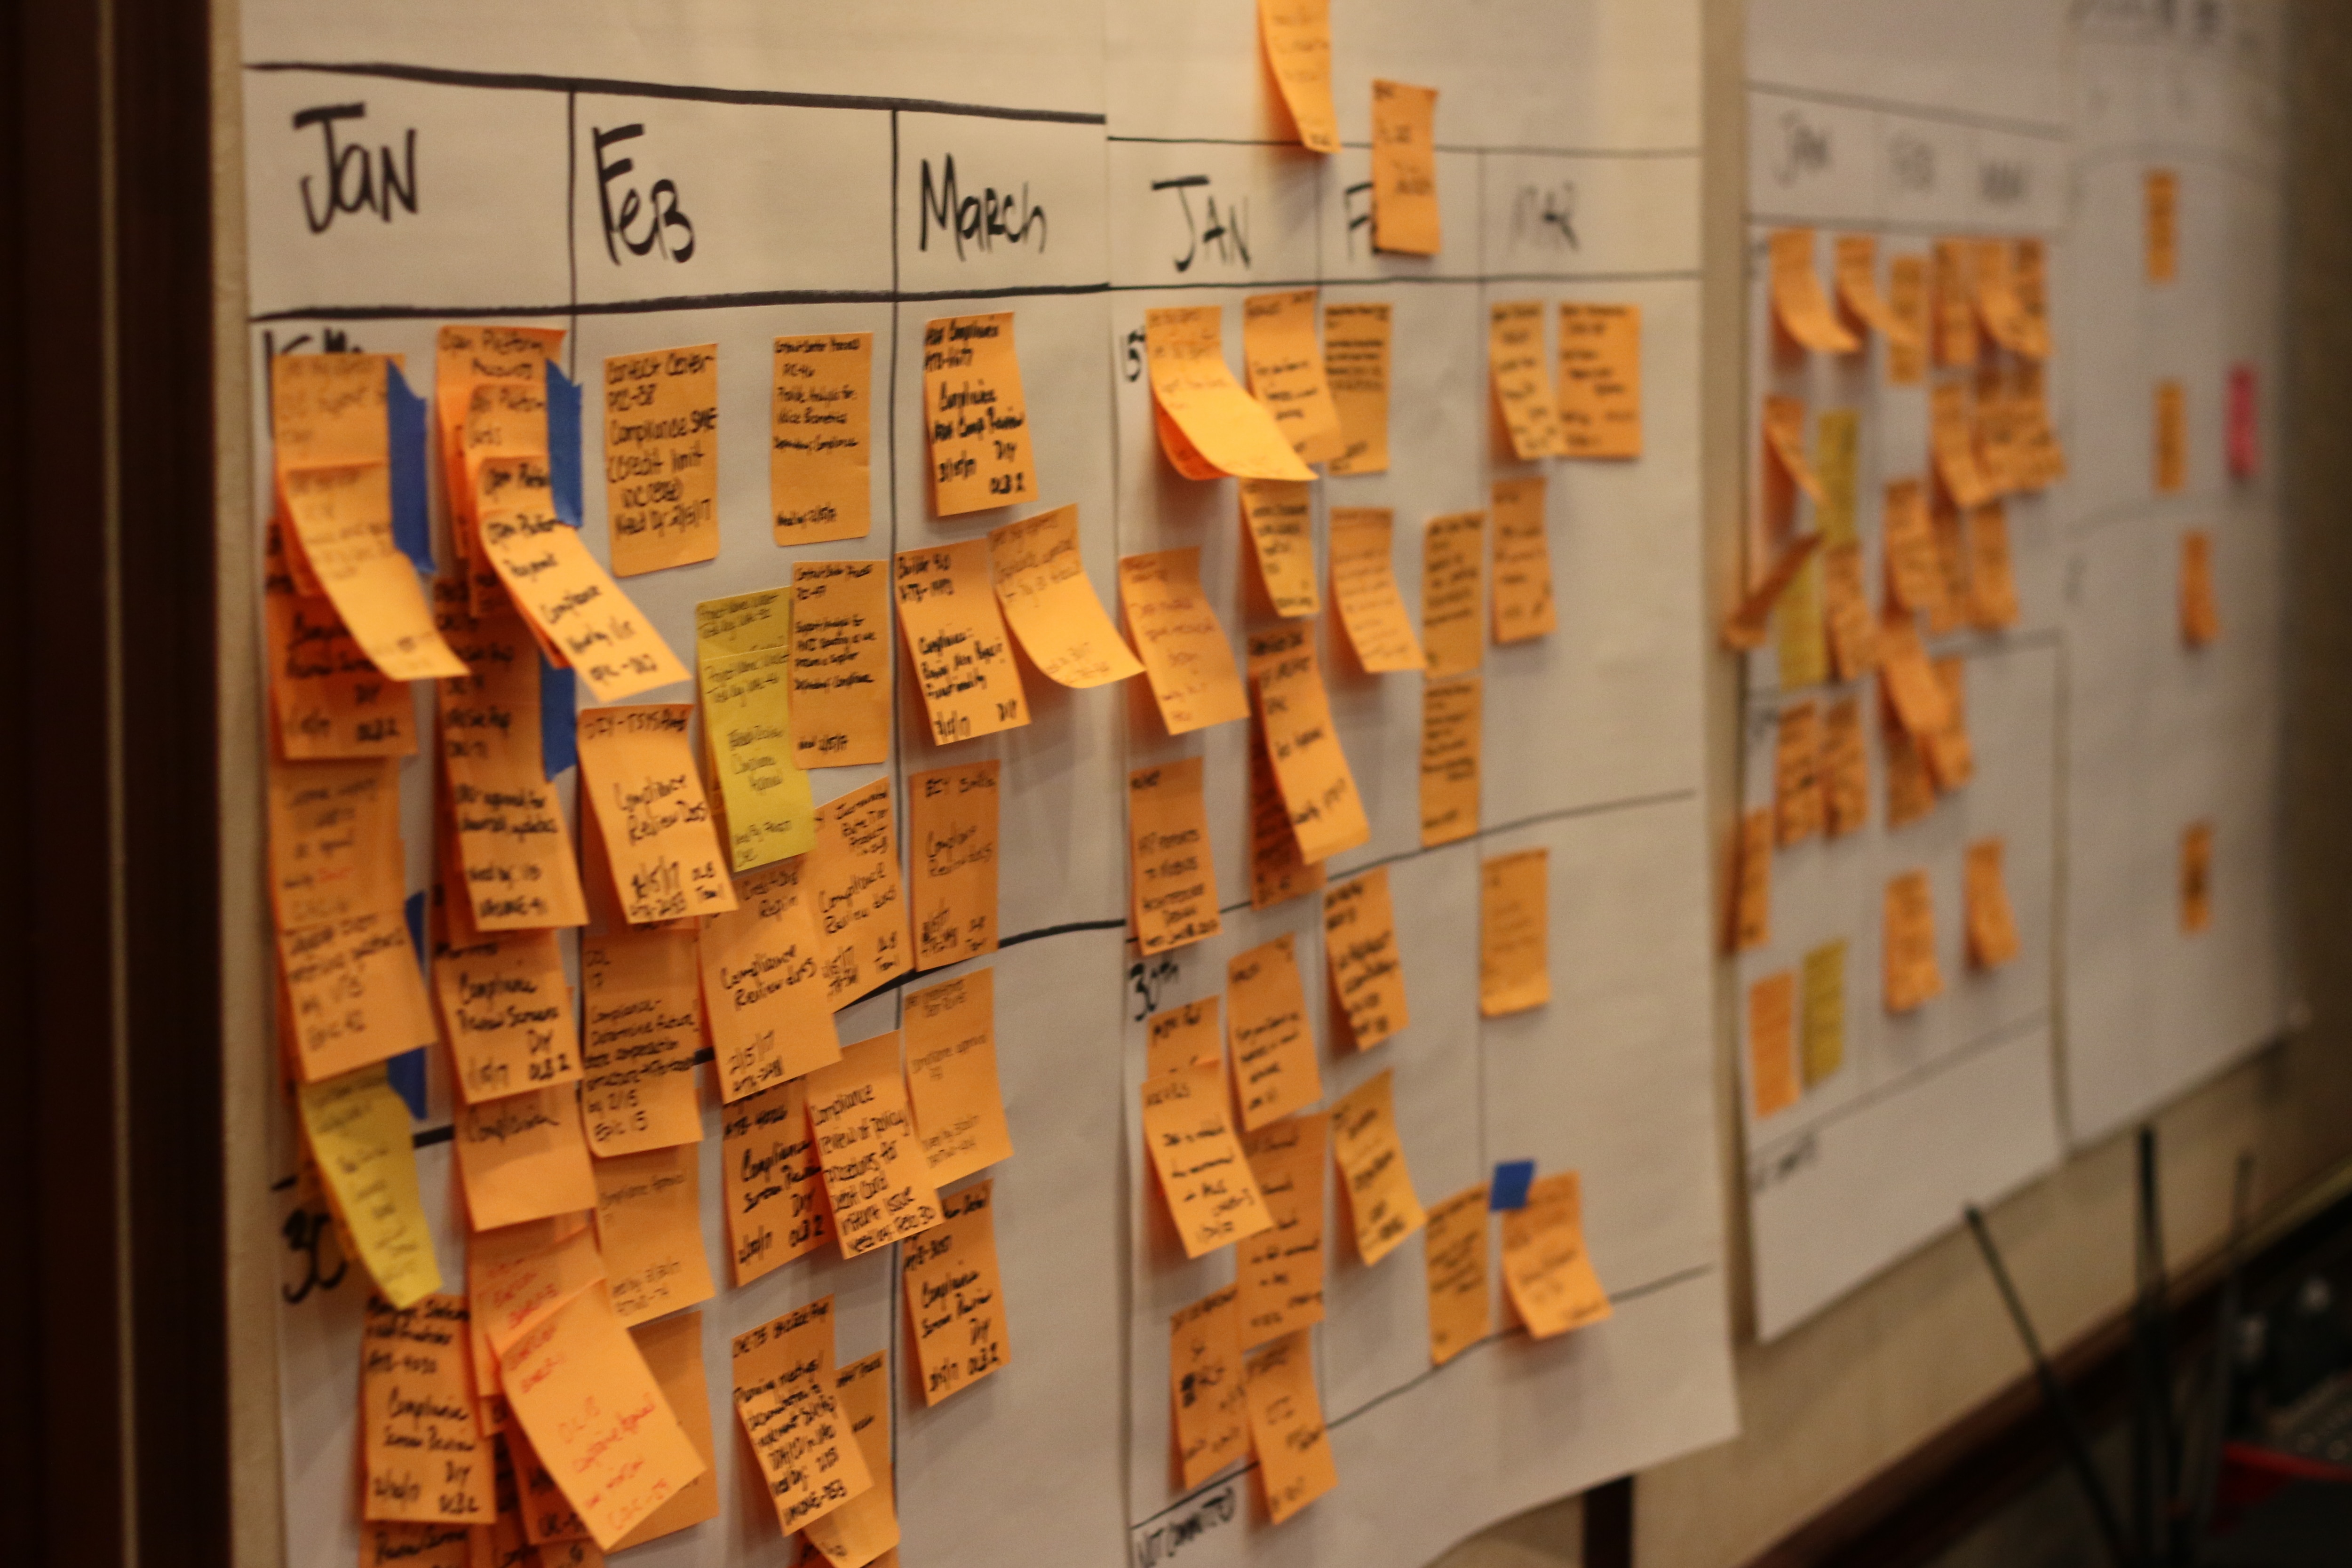 Orange sticky notes denote project dependencies at the BBVA Compass Quarterly Planning meeting.